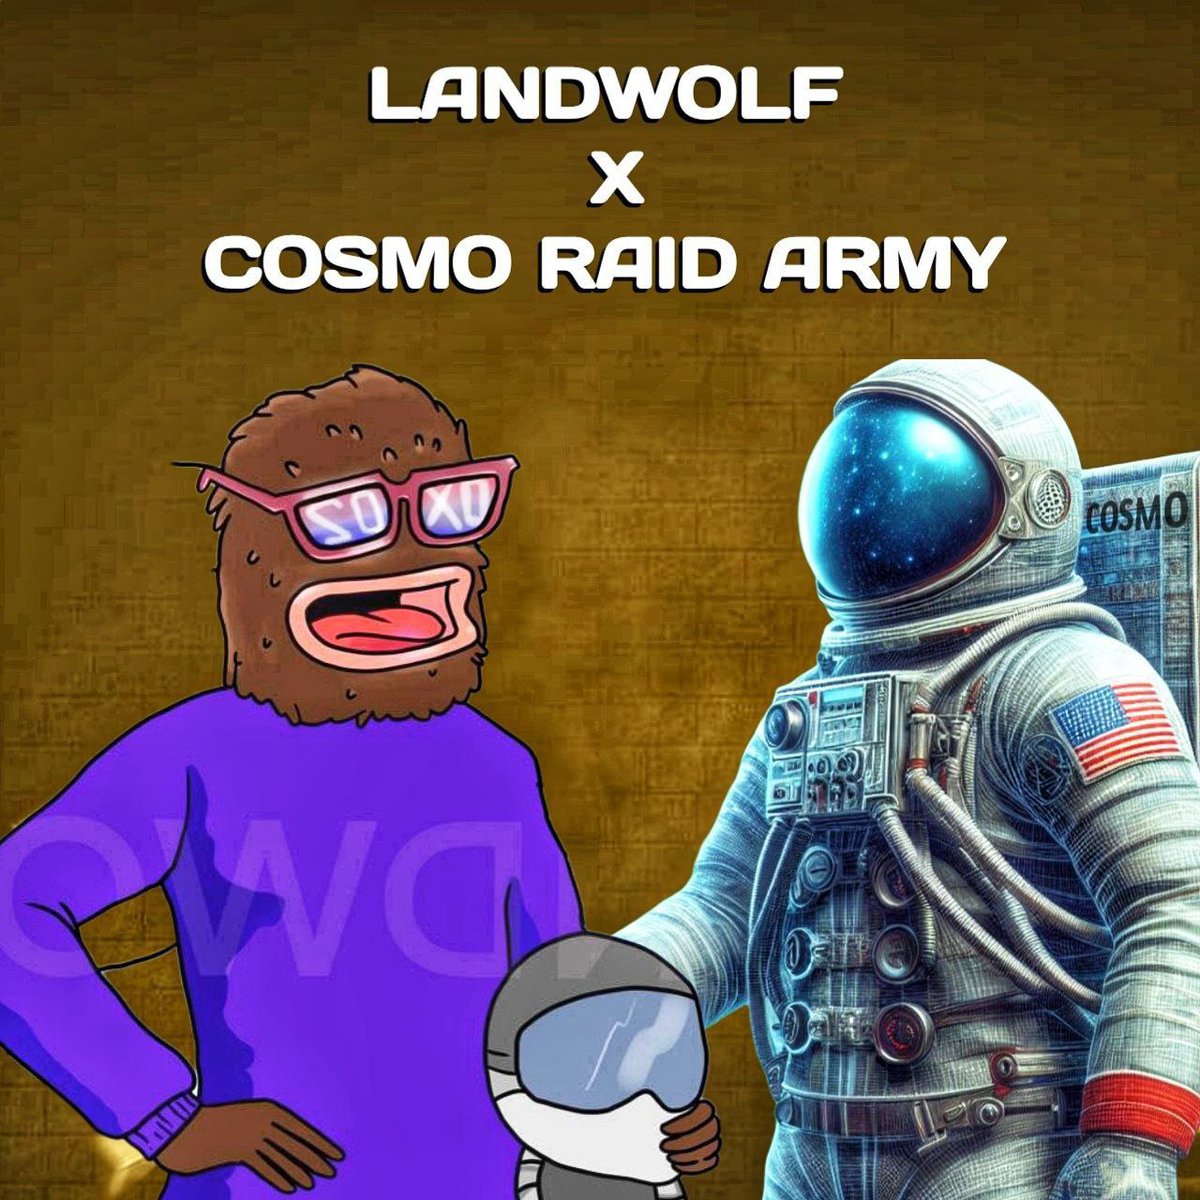 COSMO RAID ARMY X #LANDWOLF Such a great partnership 🔥 Looking forward to seeing this project gain its proper Twitter presence Great launch indeed This could possibly send 🔥🔥 Perfect time to ape in is now MCAP: 1.5mill X: twitter.com/LandWolfMeme TG:t.me/LANDWOLFMeme